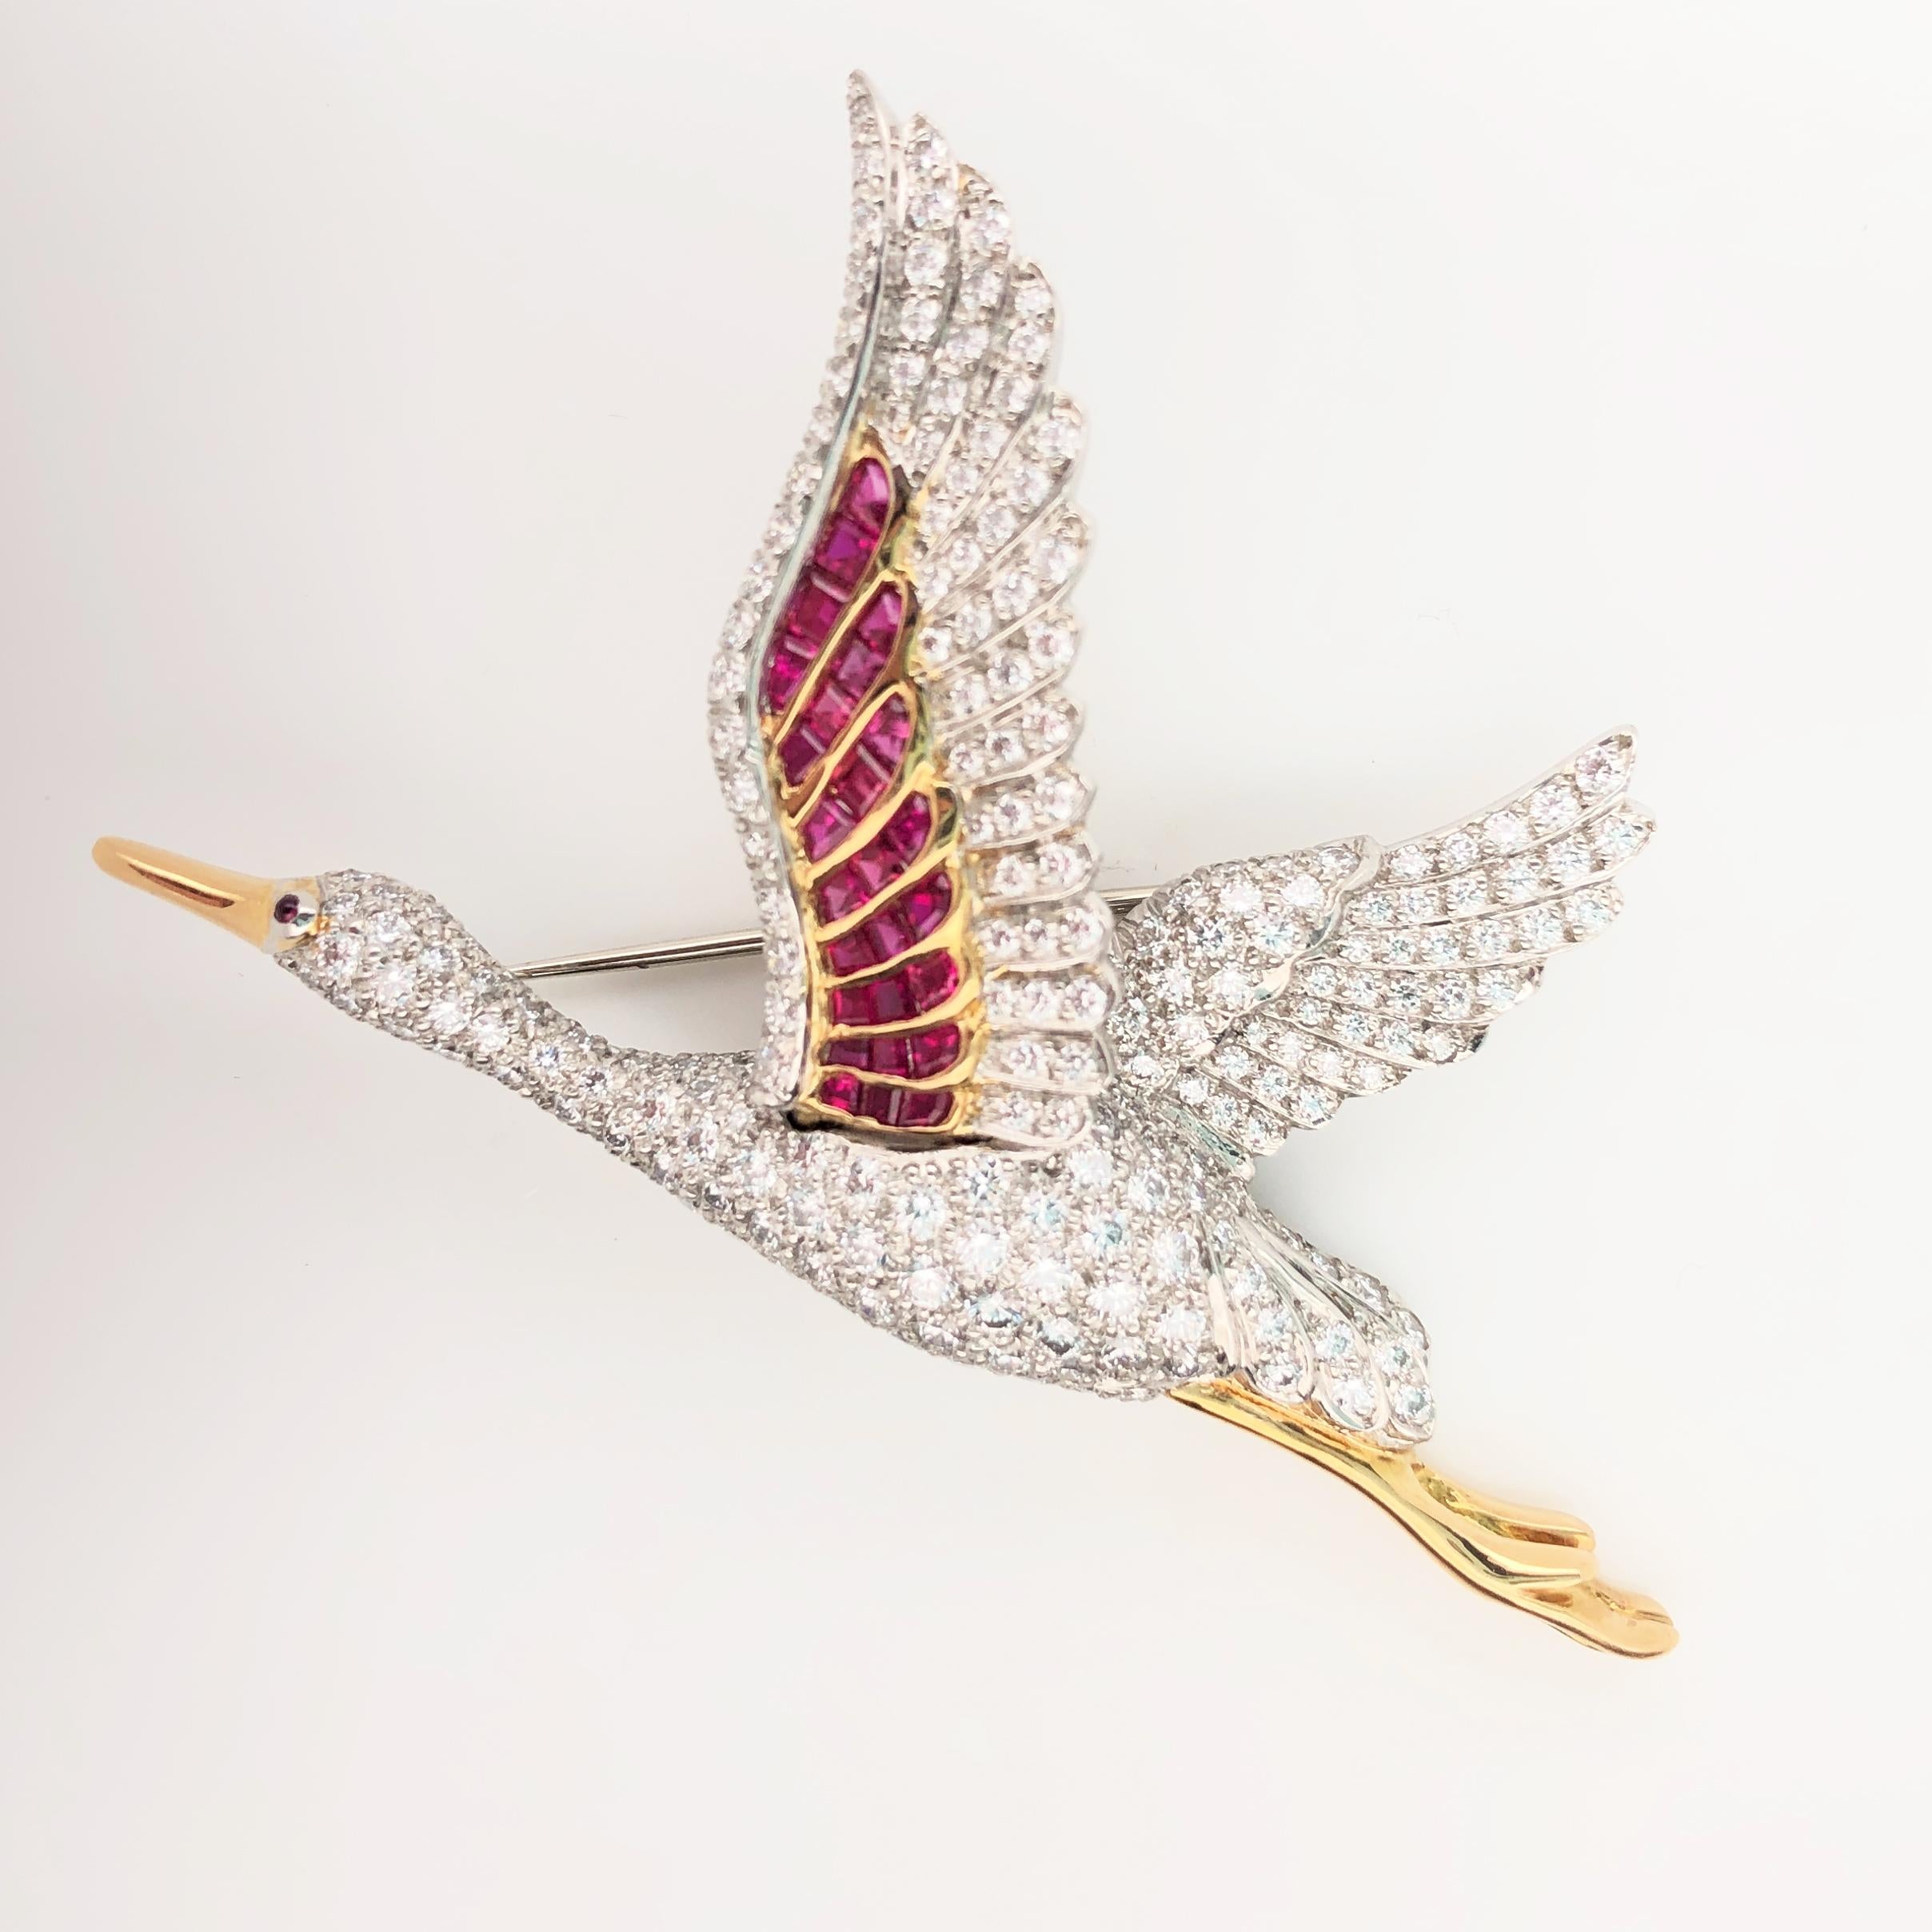 Oscar Heyman 18kt yellow gold and platinum flying egret bird brooch contains 245 round diamonds weighing 3.87cts (F-G/VS+), 26 square rubies weighing 1.16cts, and 1 cabochon ruby as the eye. The wing with rubies can 'flap' slightly. It is stamped